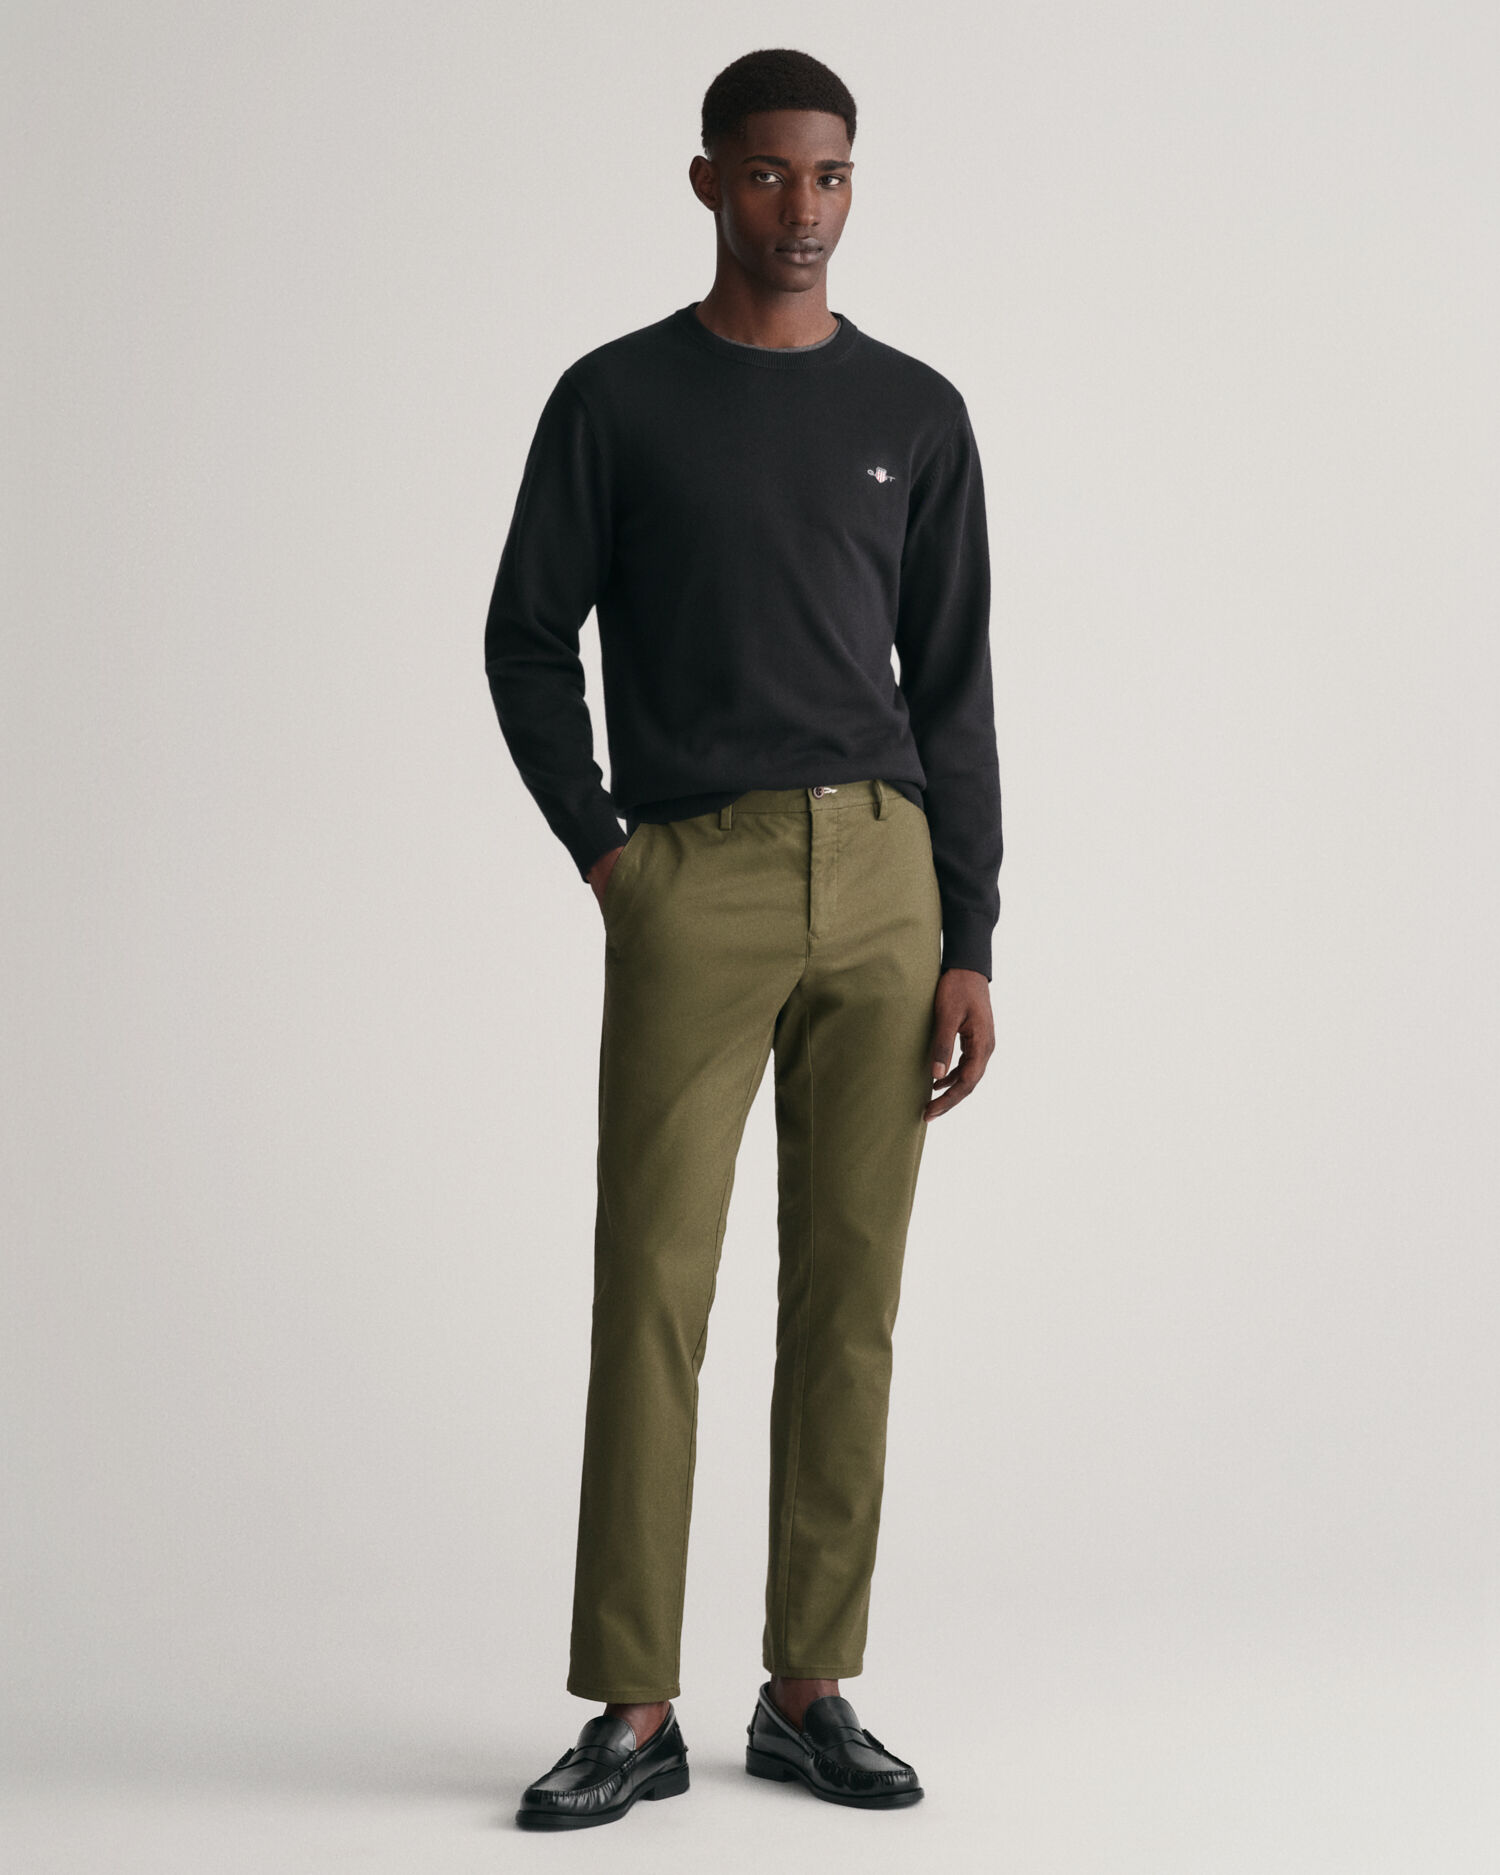 19 Best Men's High Waisted Pants 2023: Take Your Trousers to New Heights |  GQ